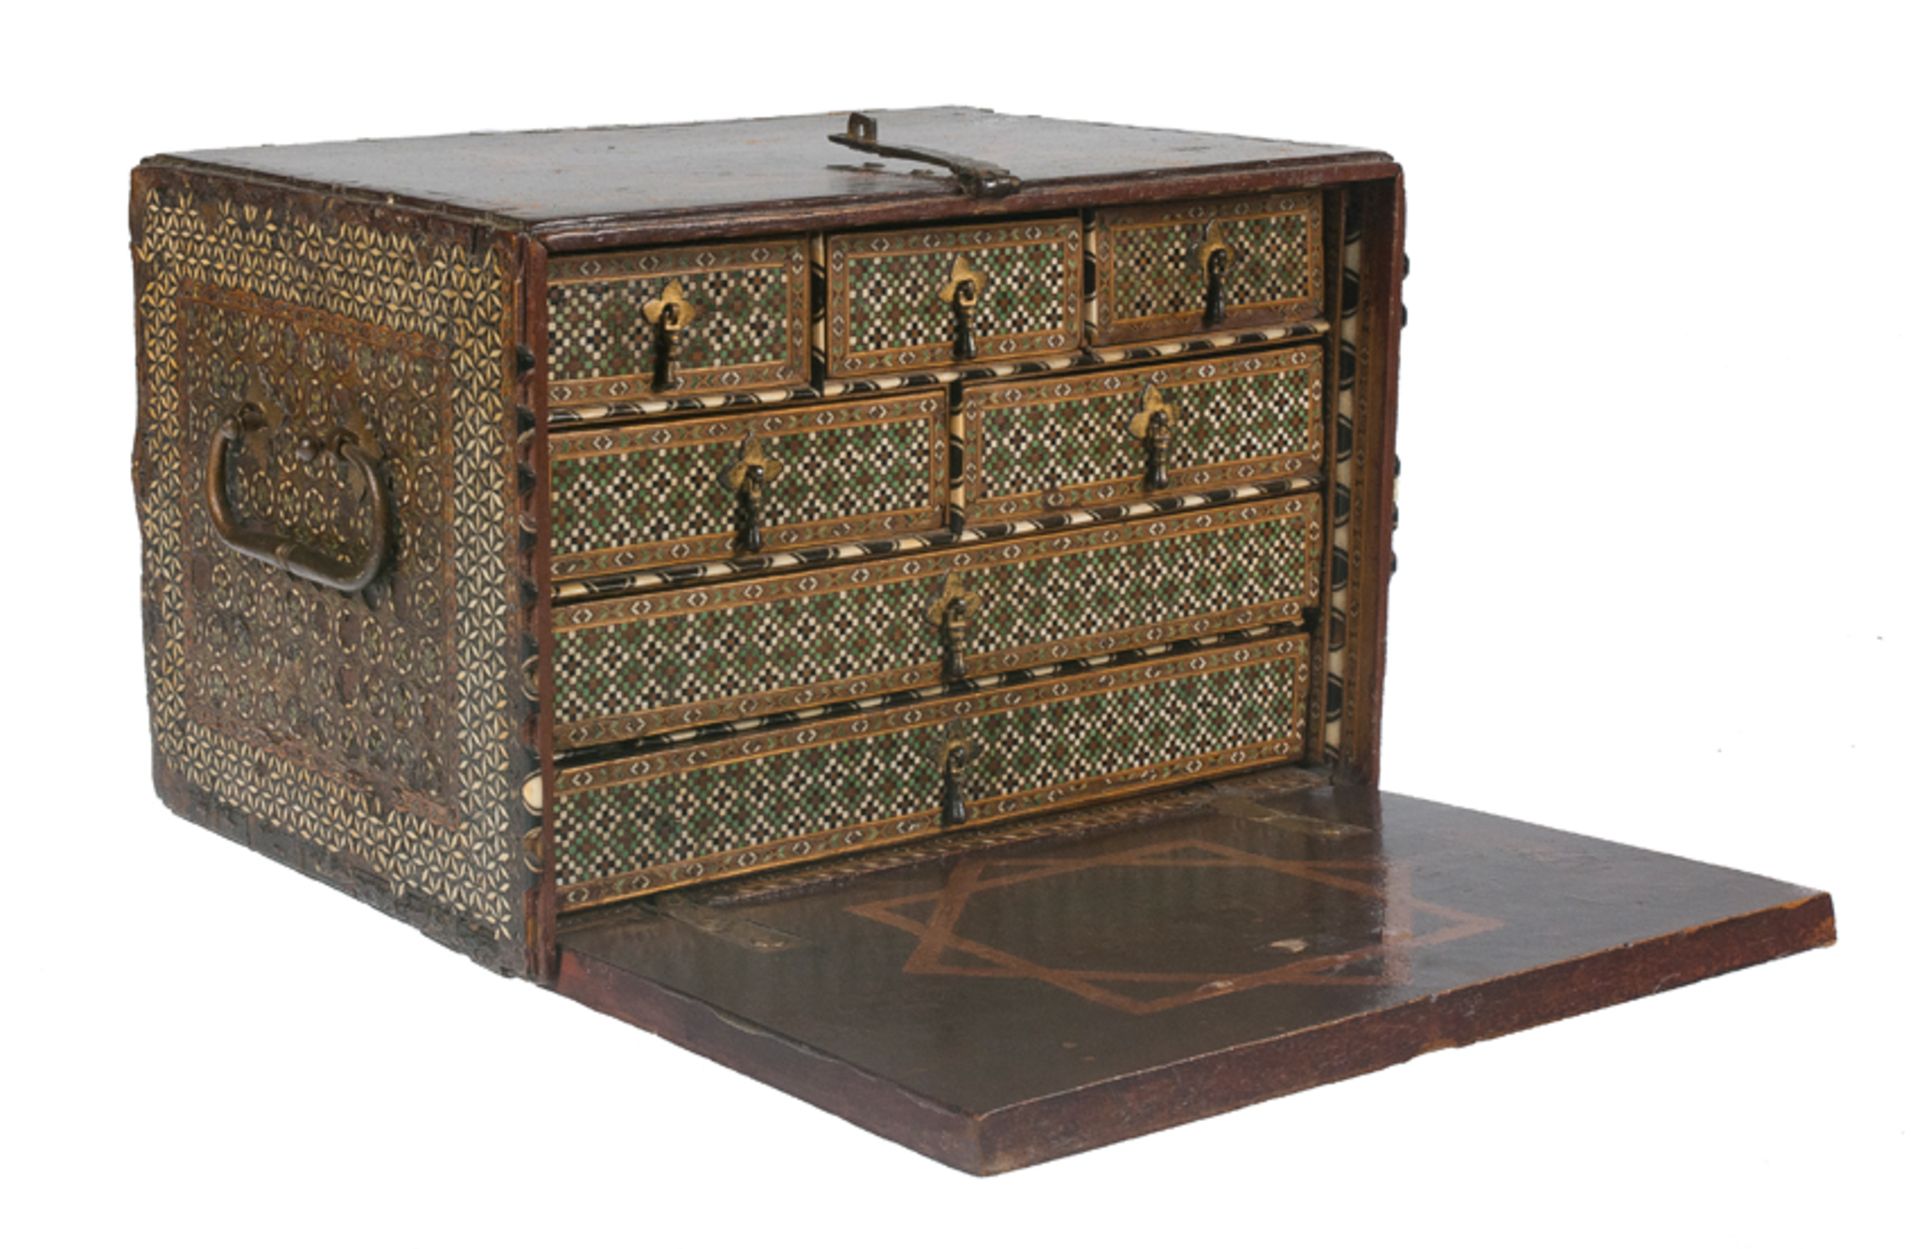 Imposing, wooden Nazarid chest with inlay in bone and contrasting woods. Early 16th century and end